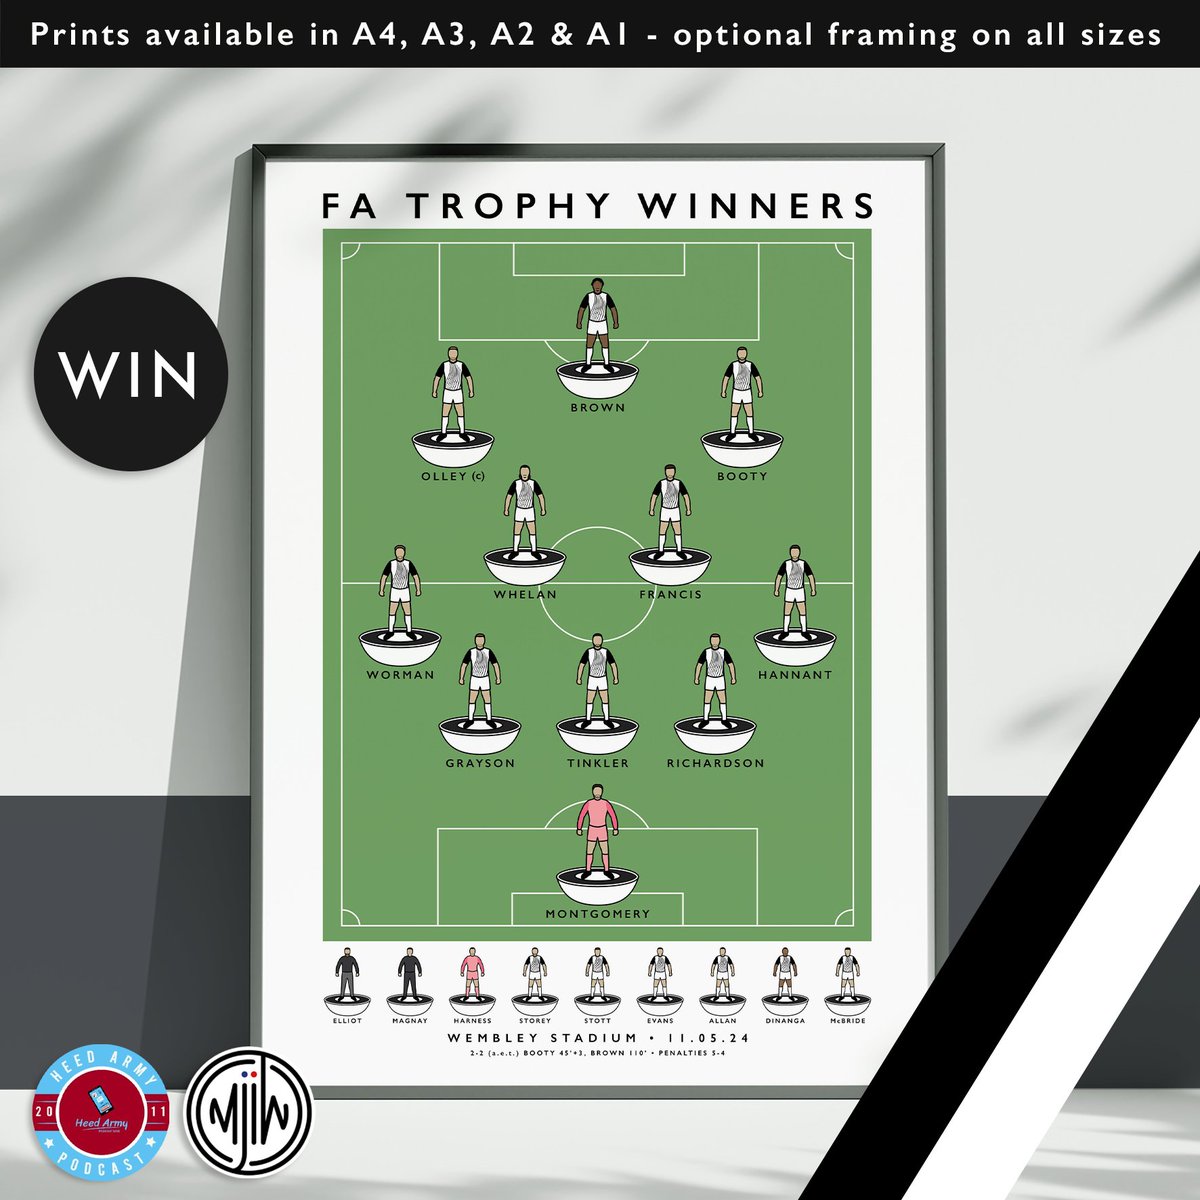 Hi Everyone, we've got a competition for you! You can win a print of this fantastic FA Trophy/Wembley design courtesy of @matthewjiwood. To enter, retweet this post and make sure you're following both us and Matthew. Good luck! #gatesheadfc